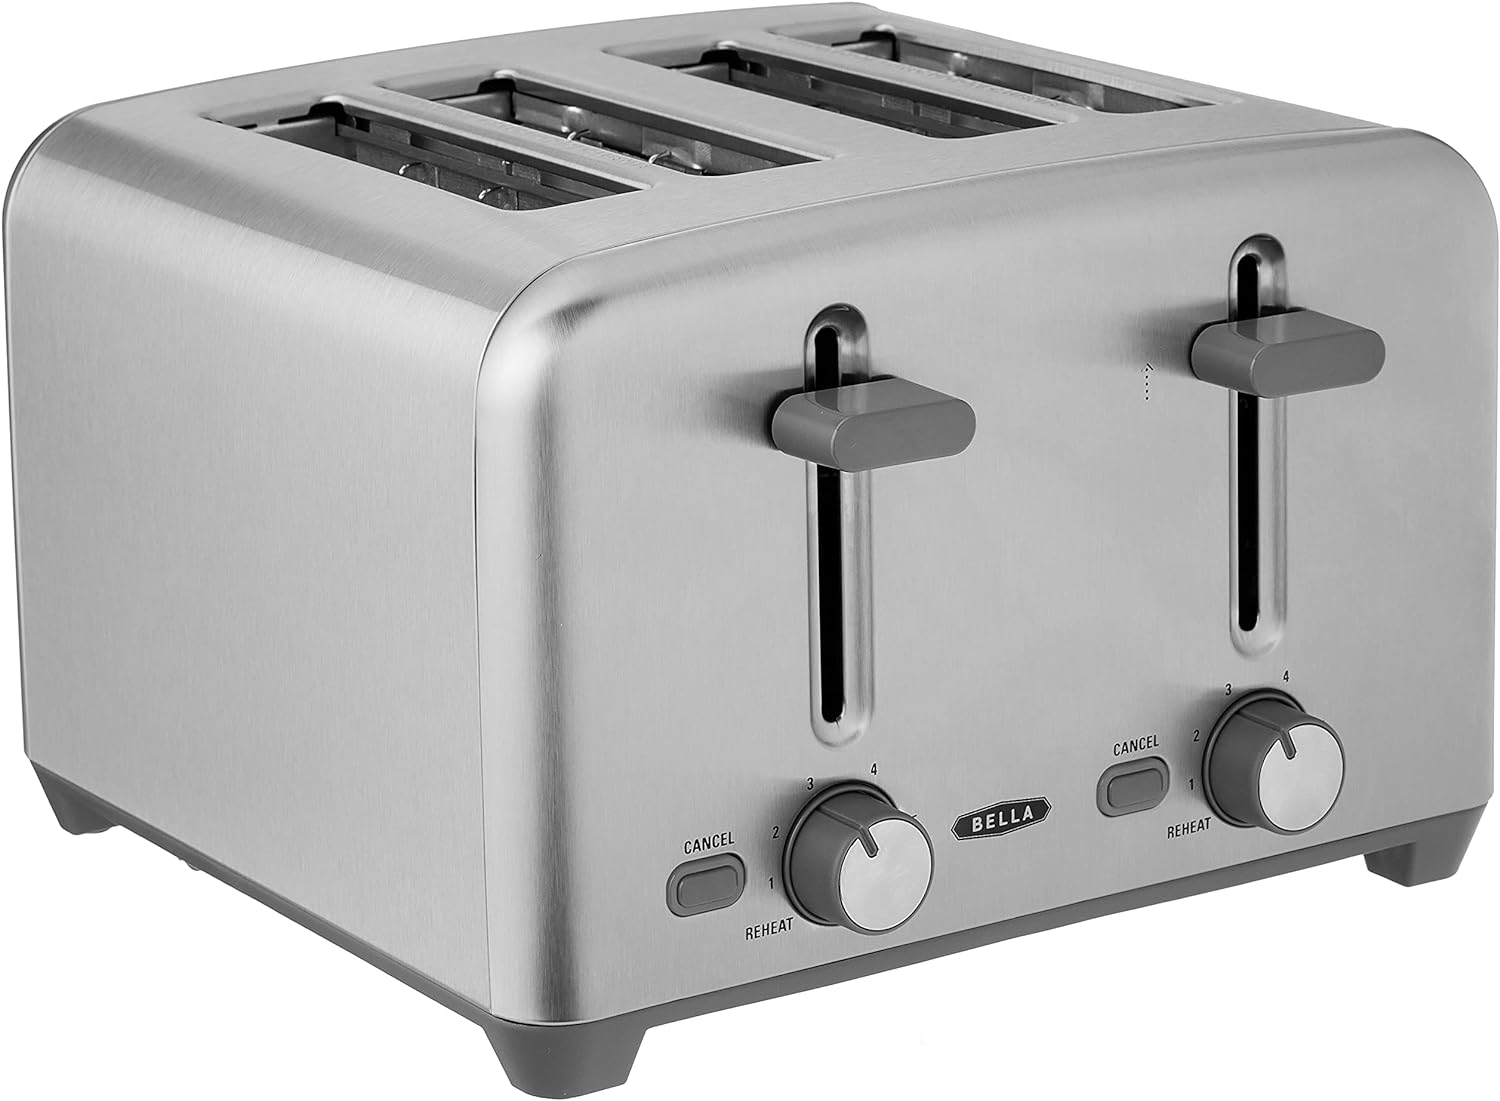 BELLA 4 Slice Toaster with Auto Shut Off - Extra Wide Slots and Removable Drop-Down Crumb Tray with Cancel and Reheat Function - For Texas Toast, Large Bread & Bagel, Stainless Steel